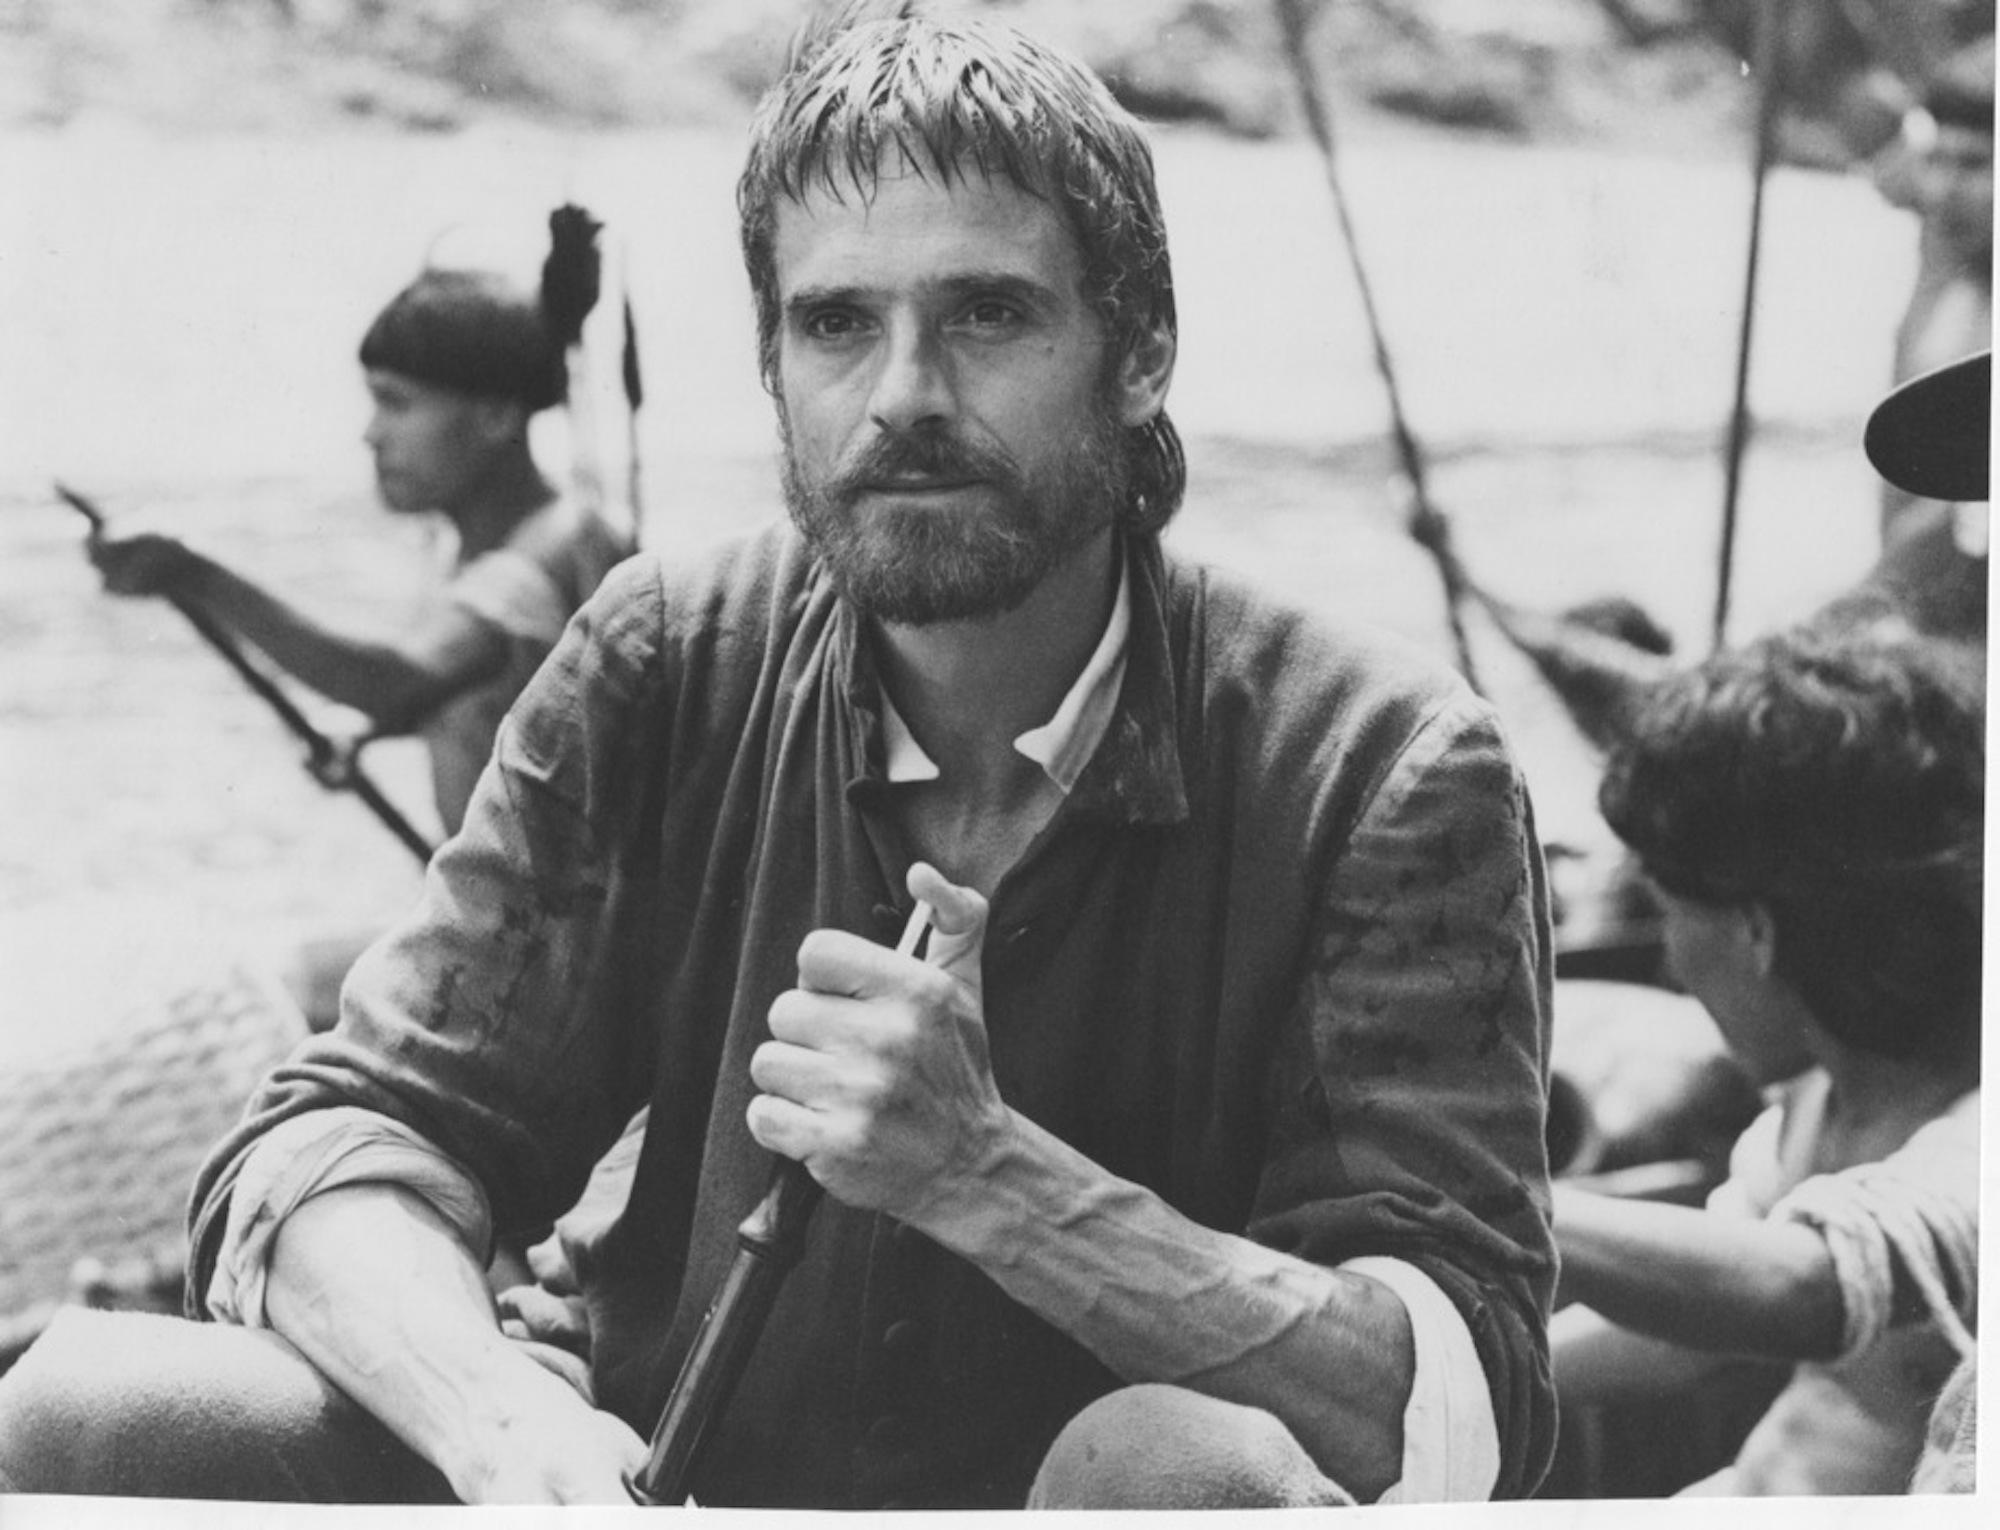 Jeremy Irons on the set of "The Mission" - Vintage Photo - 1986